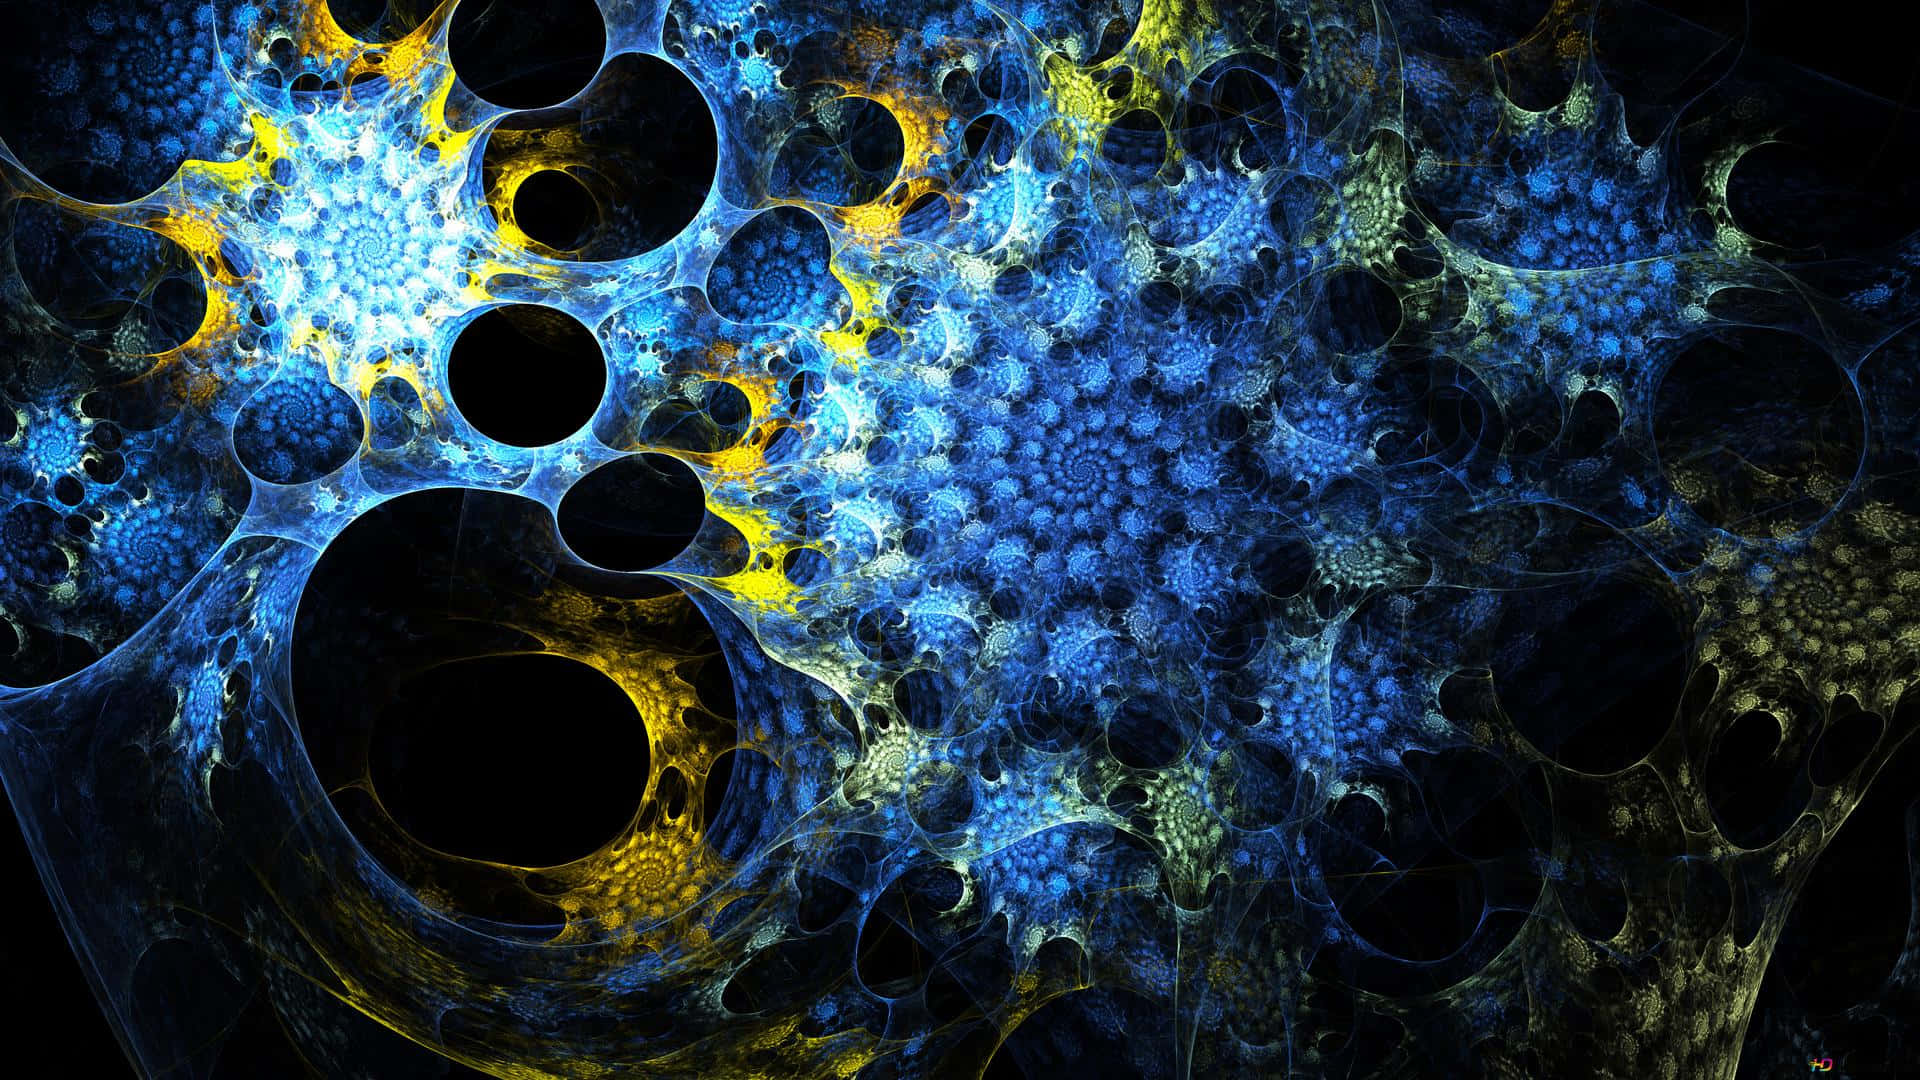 "Dive into the Psychedelic world of mesmerizing fractals" Wallpaper